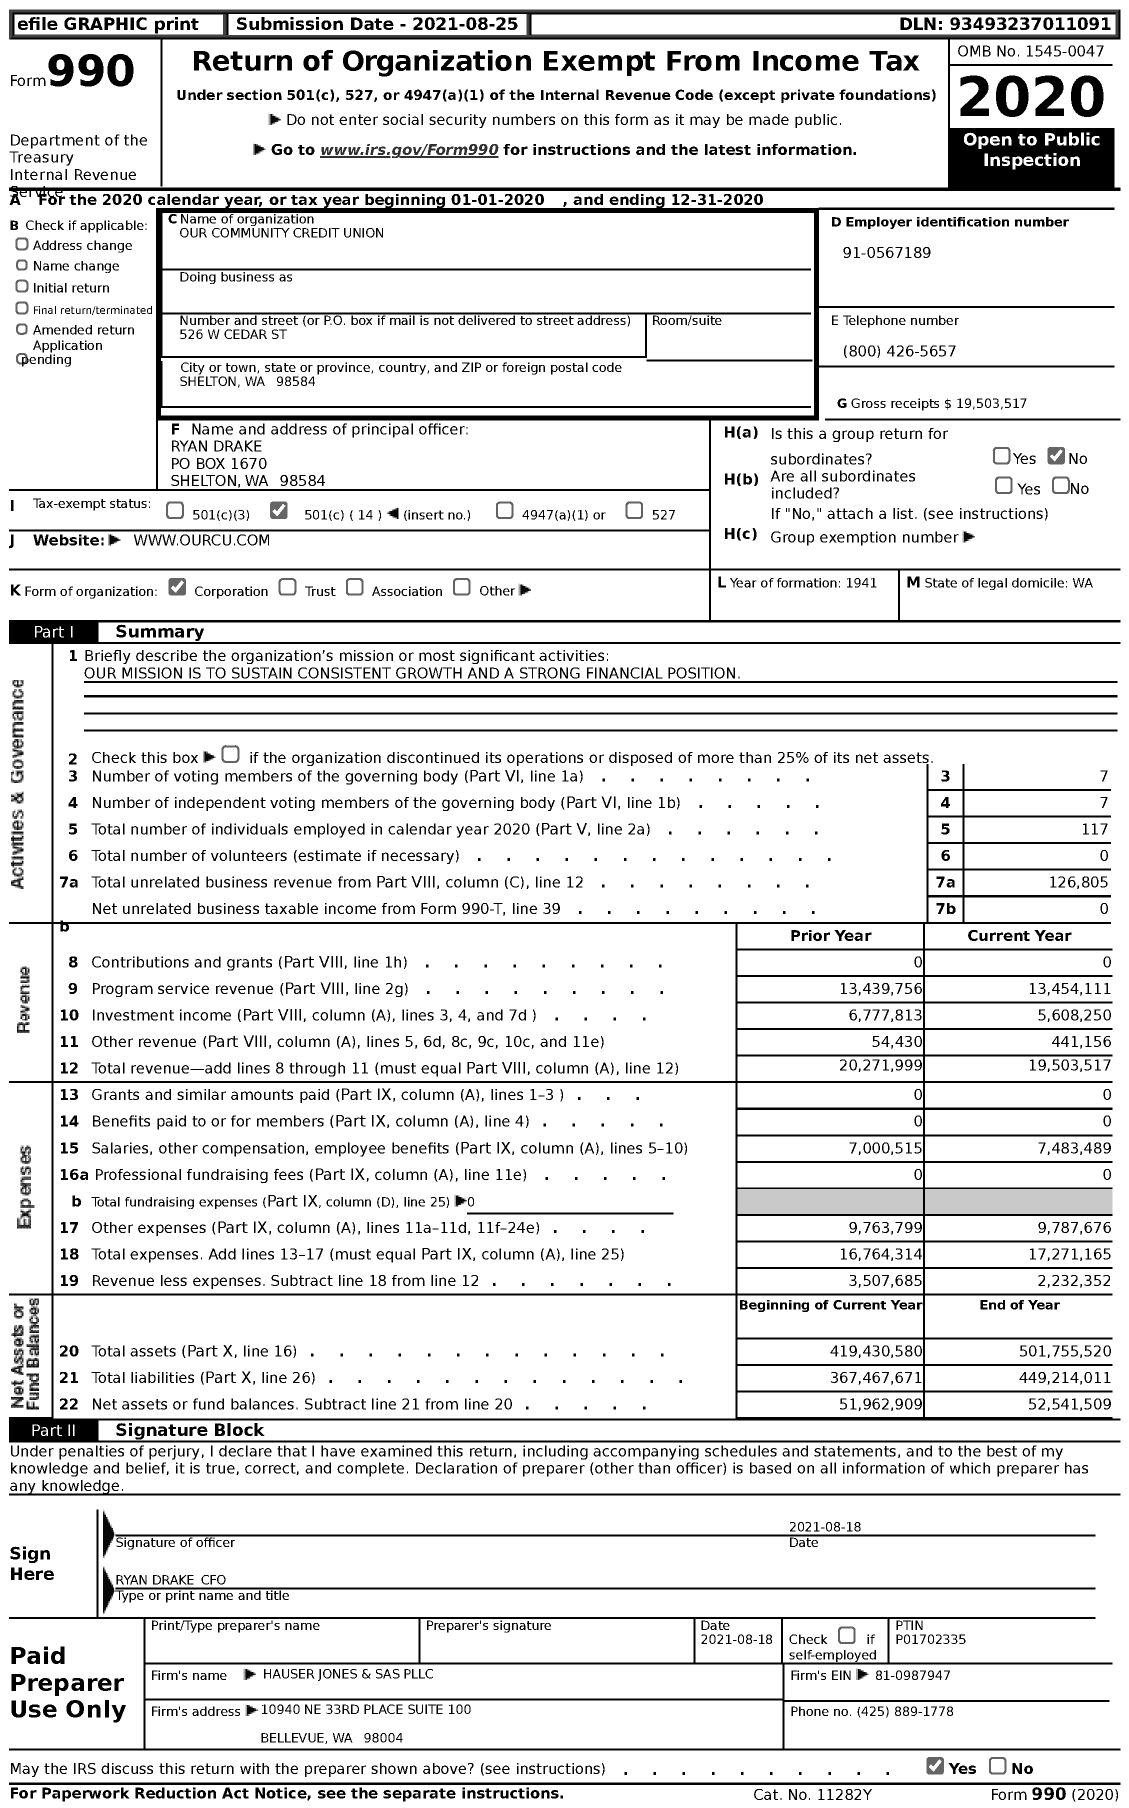 Image of first page of 2020 Form 990 for Our Community Credit Union (OCCU)